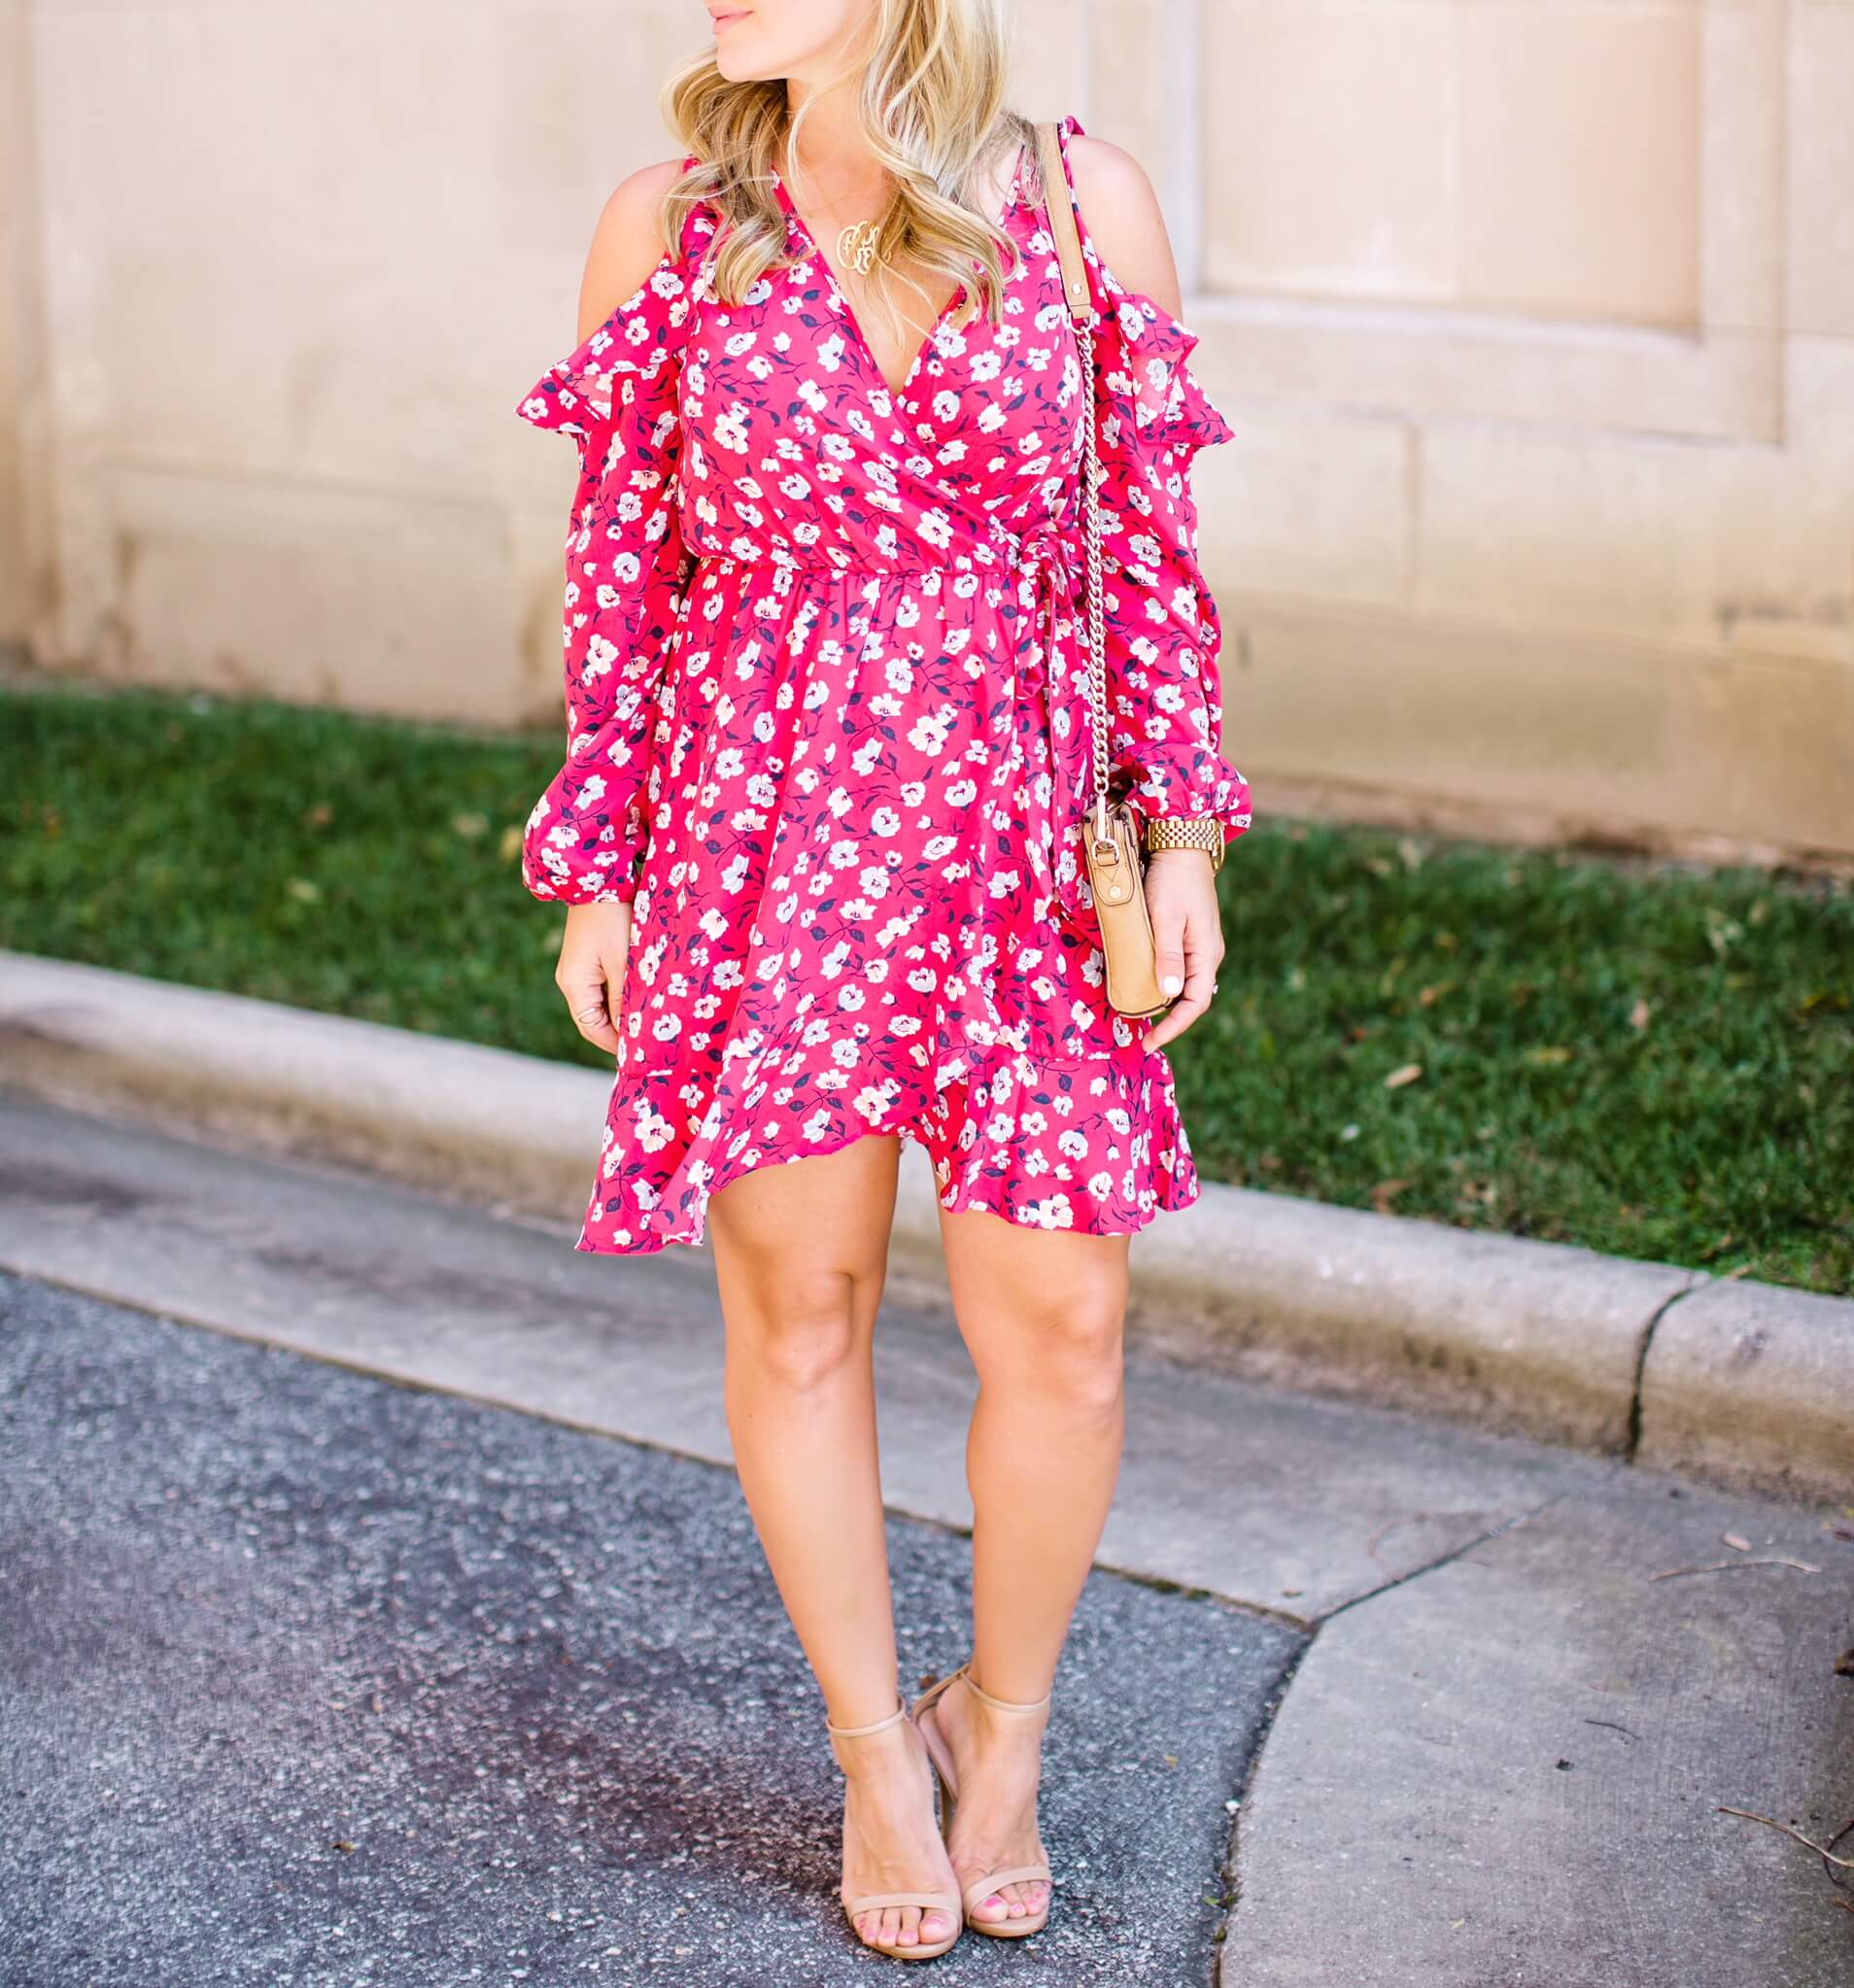 dresses to wear to fall weddings